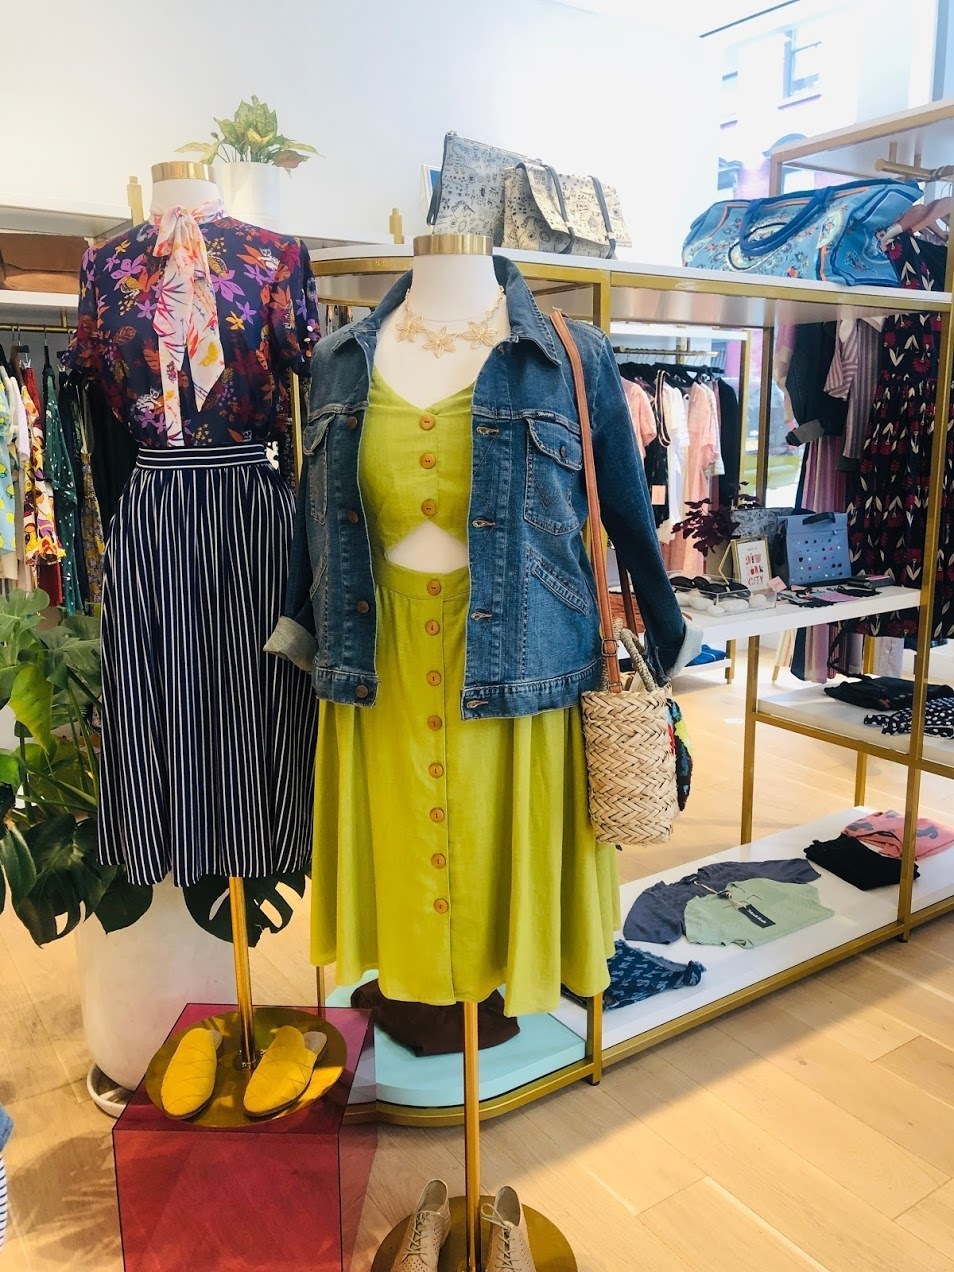 We Visited ModCloth's NYC FitShop, And Here's What It's Like